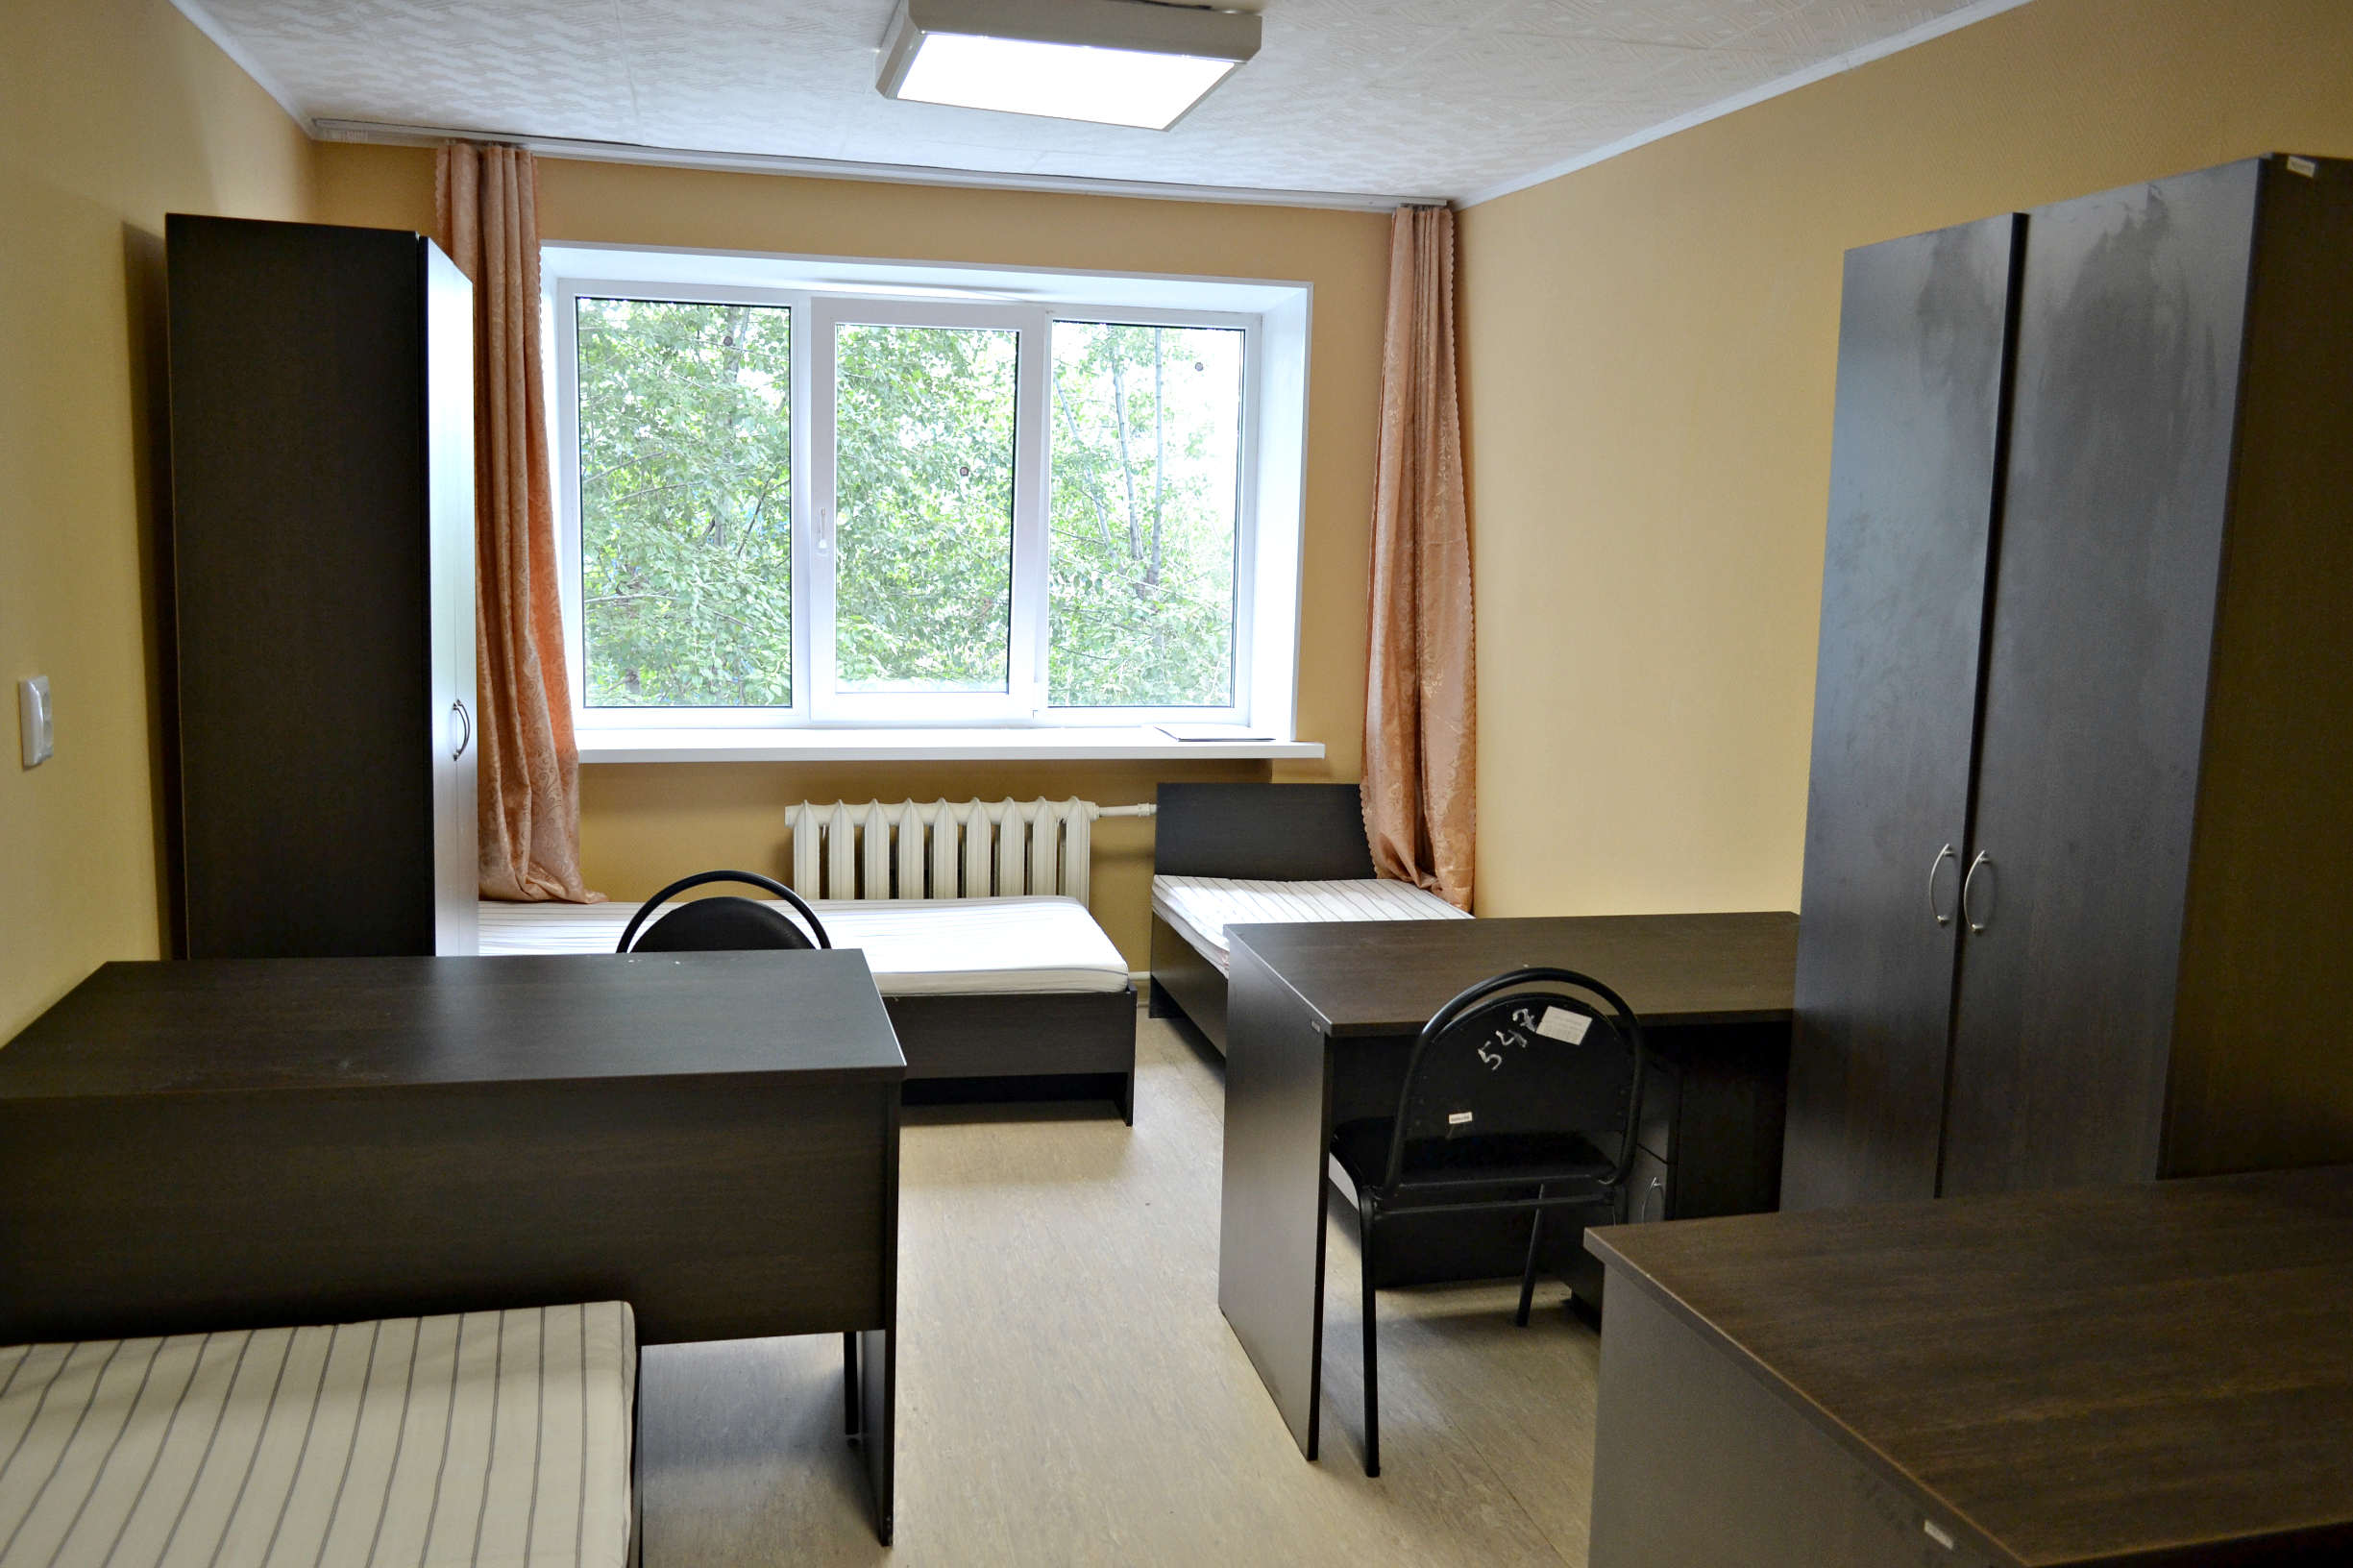 11th student dormitory